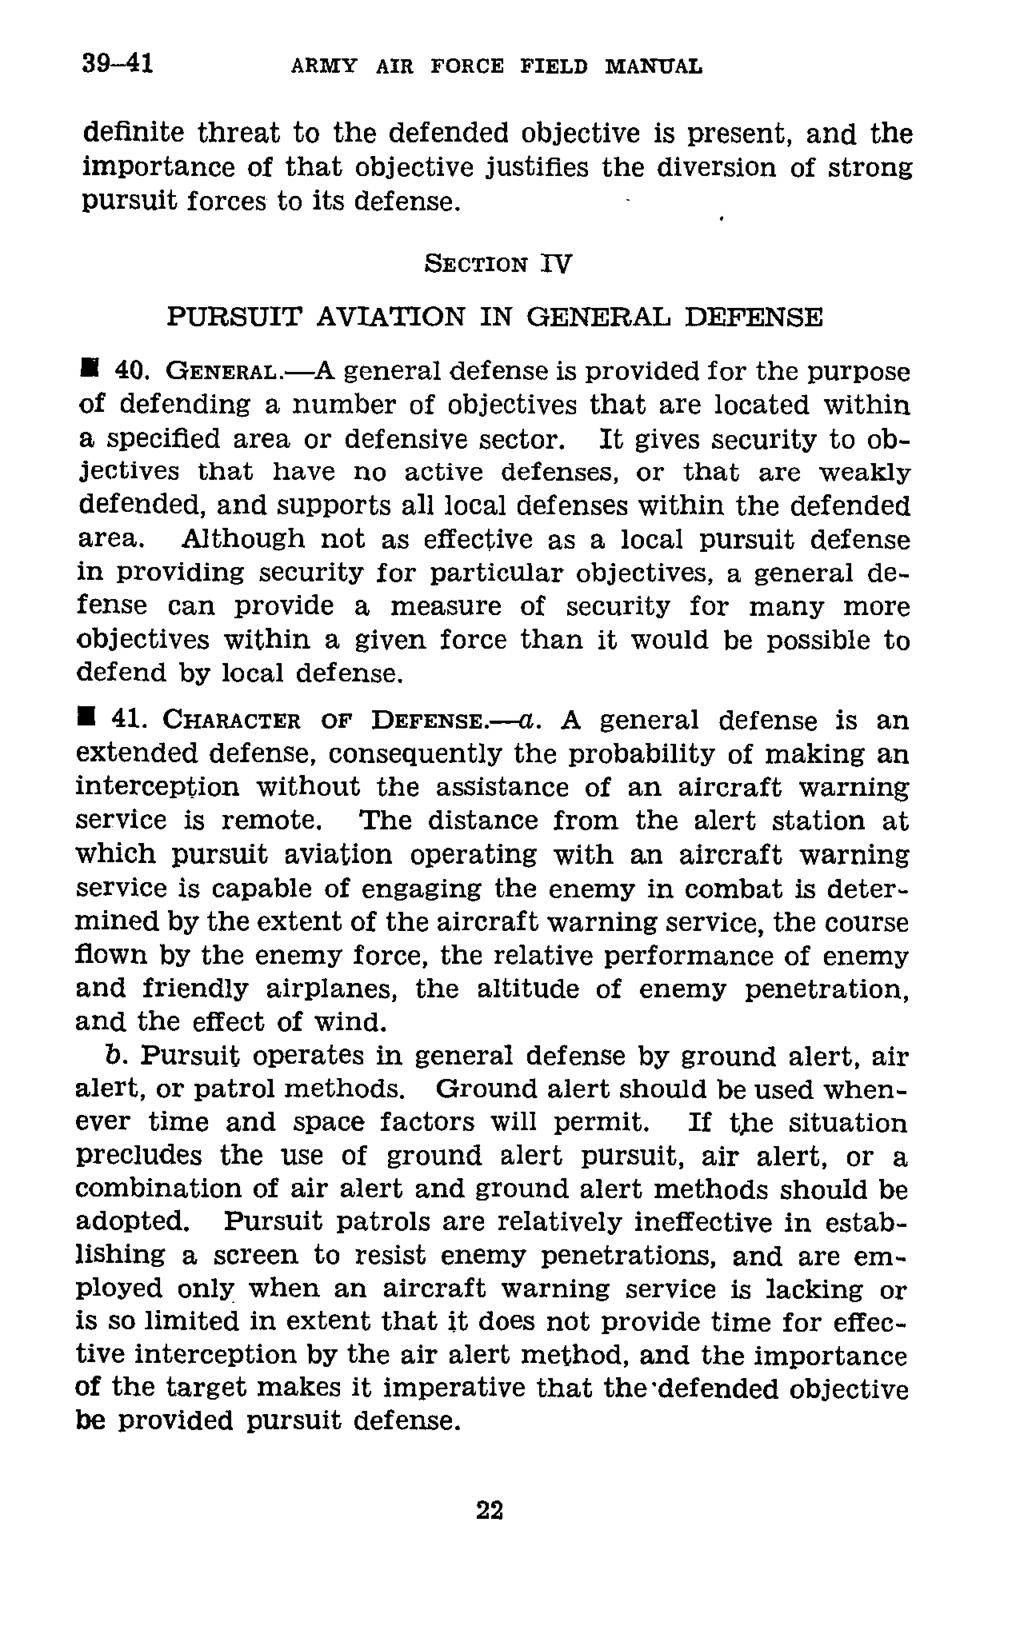 39-41 ARMY AIR FORCE FIELD MANUAL definite threat to the defended objective is present, and the importance of that objective justifies the diversion of strong pursuit forces to its defense.